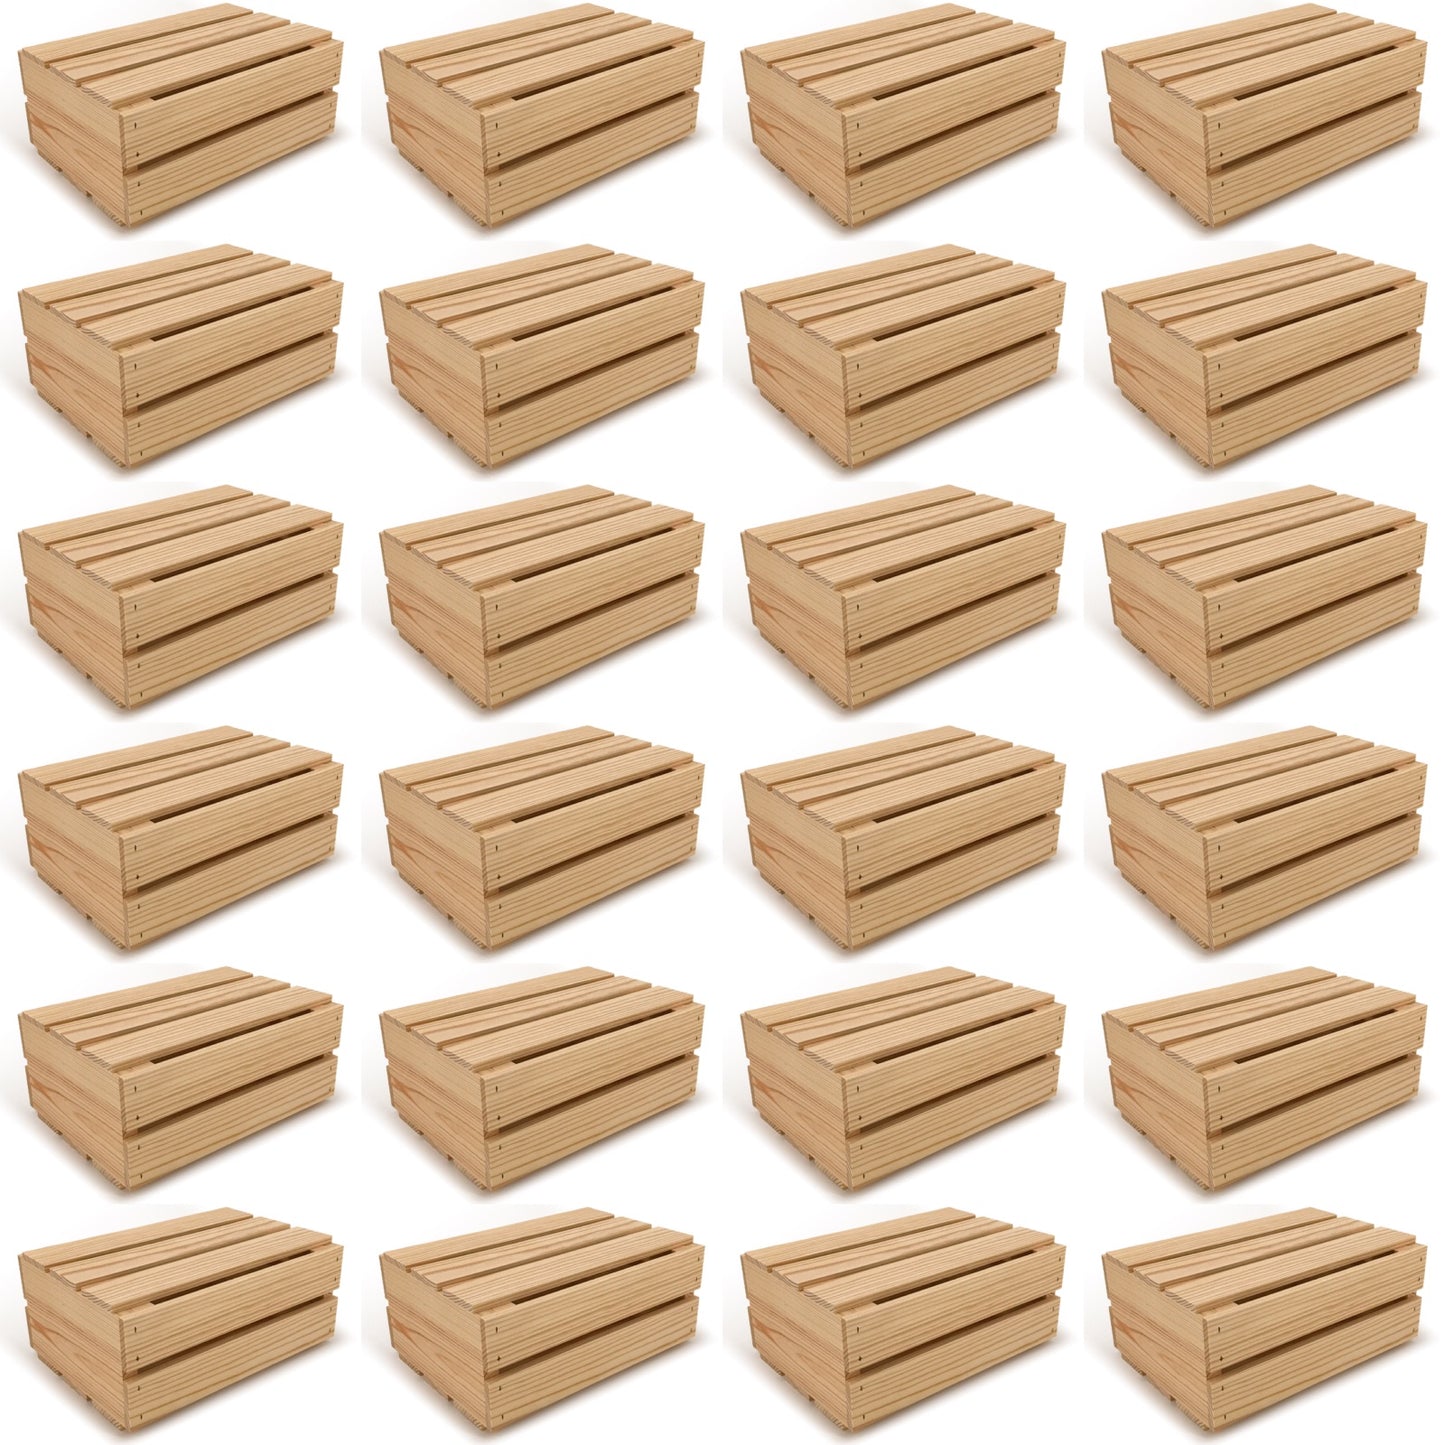 24 Small wooden crates with lid 12x9x5.25, 6-WS-12-9-5.25-NX-NW-LL, 12-WS-12-9-5.25-NX-NW-LL, 24-WS-12-9-5.25-NX-NW-LL, 48-WS-12-9-5.25-NX-NW-LL, 96-WS-12-9-5.25-NX-NW-LL